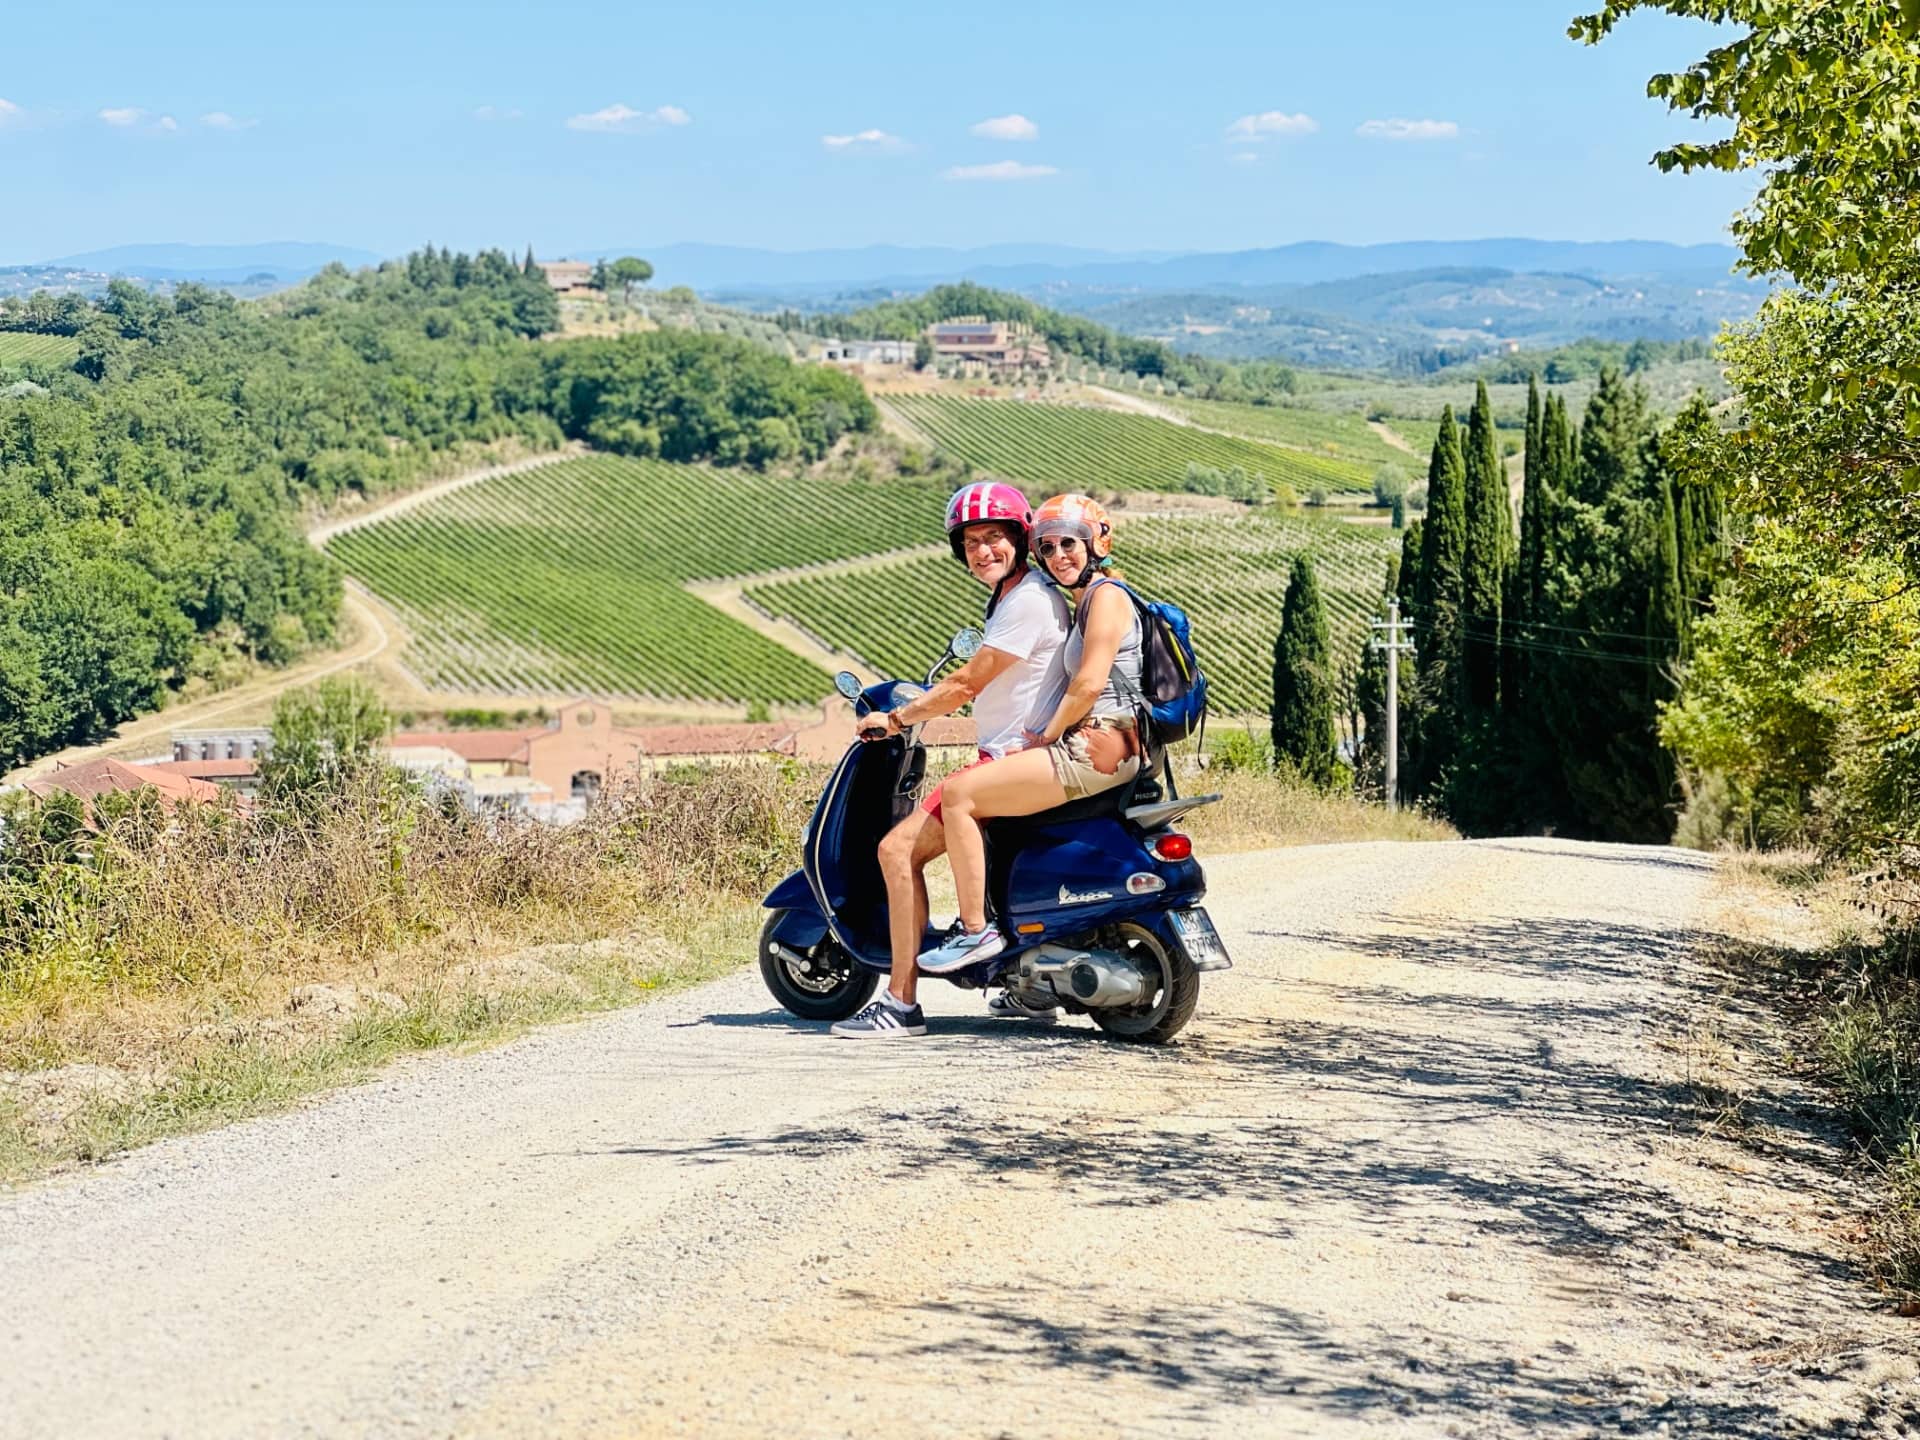 Vespa Tour in Tuscany by Fun in Tuscany Tour